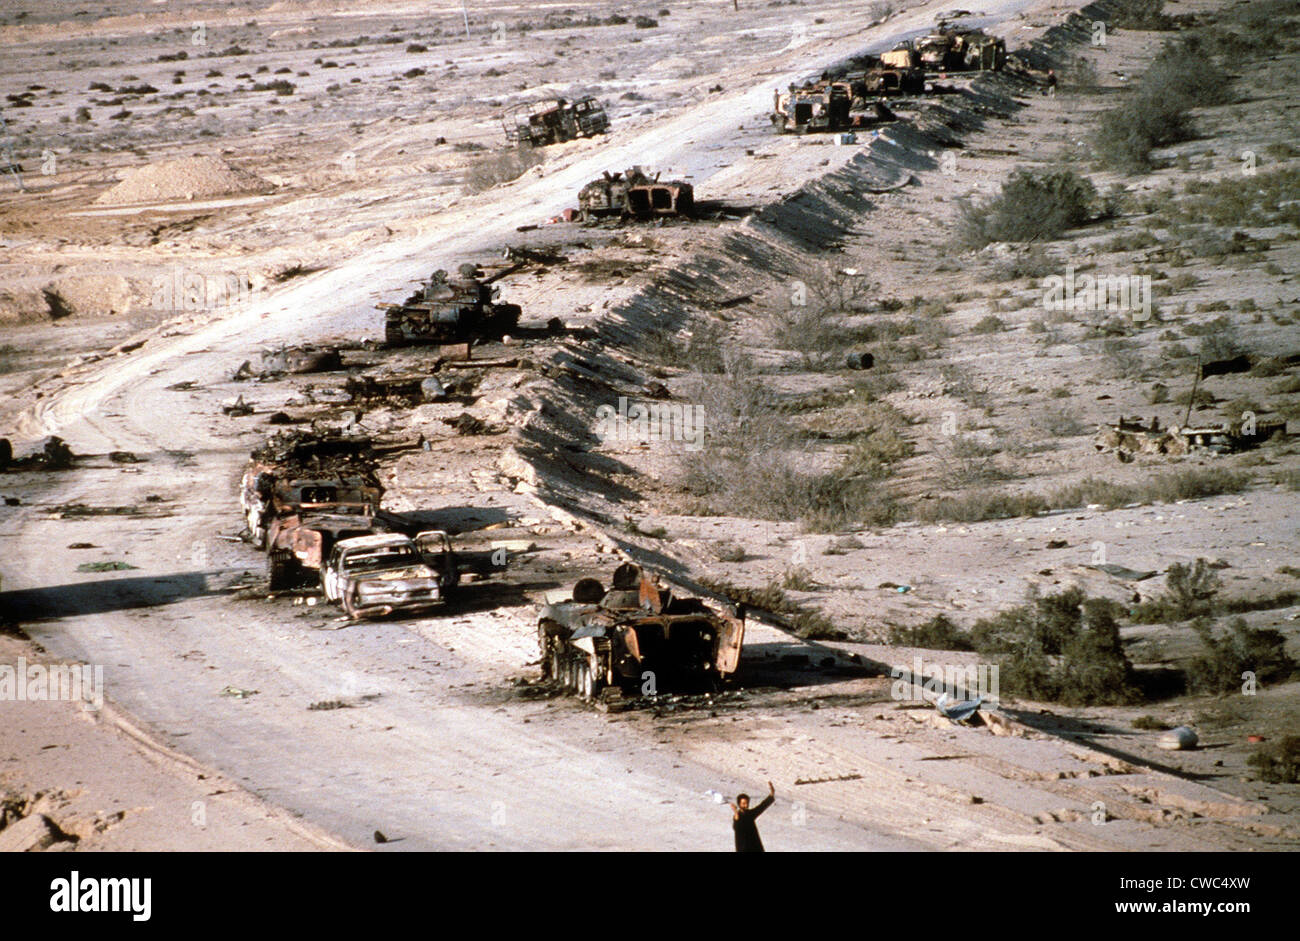 An Iraqi armored column destroyed in the Euphrates River Valley during Operation Desert Storm. Mar. 4 1991. (BSLOC 2011 12 9) Stock Photo